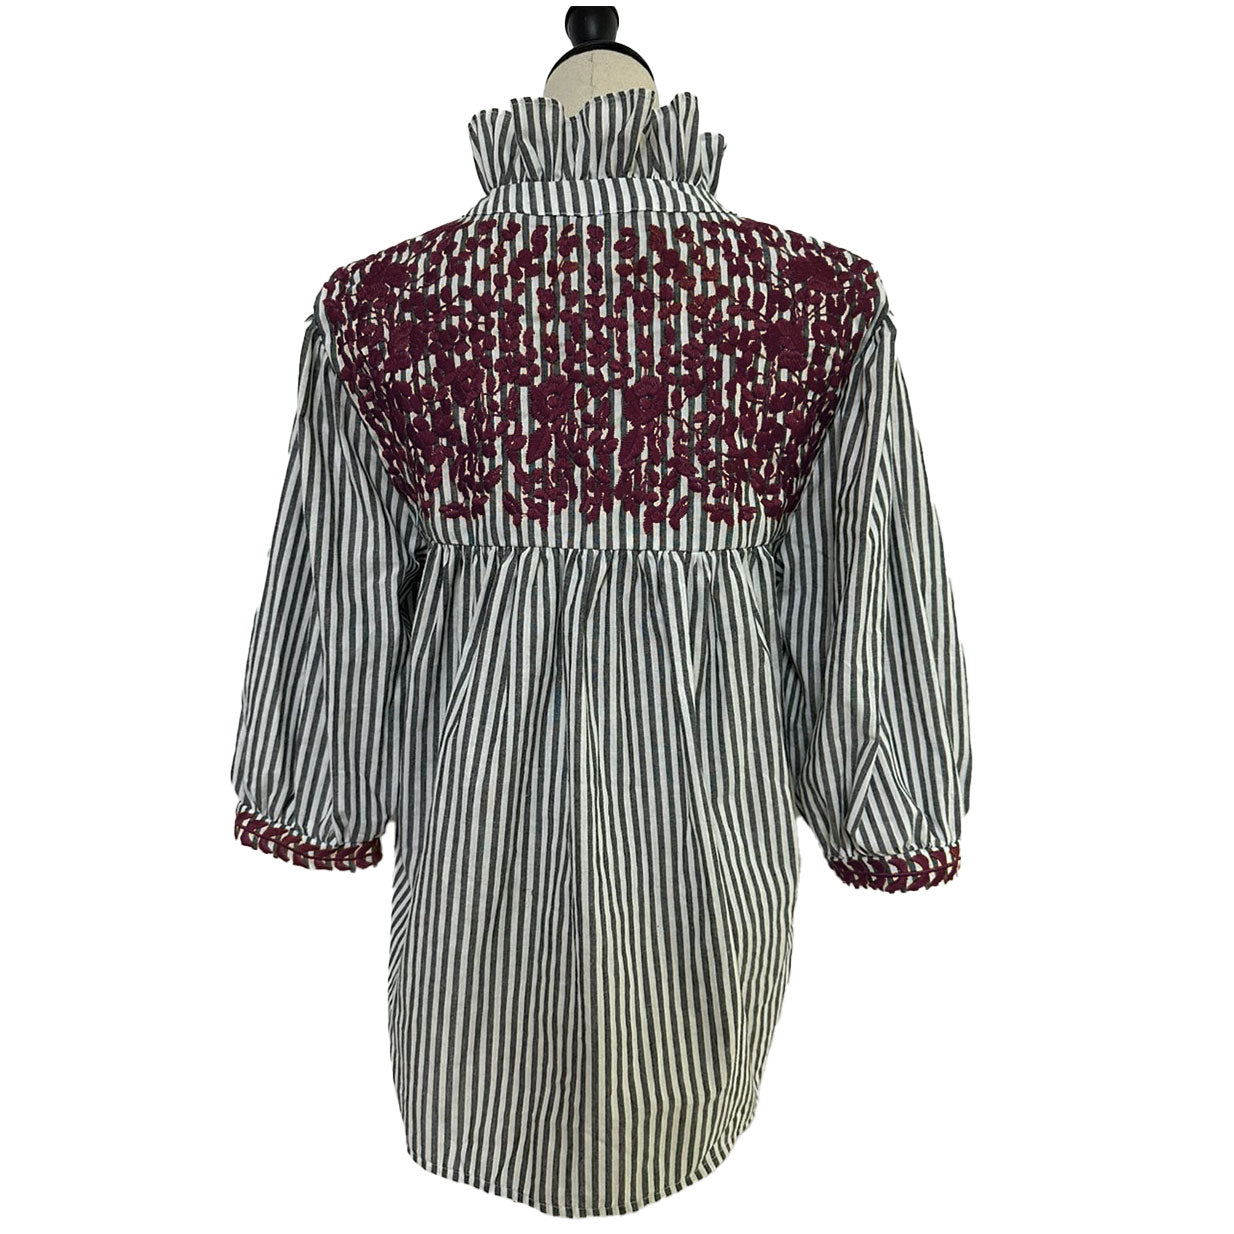 Aggie Ticking Tailgater Blouse (XS, M only)